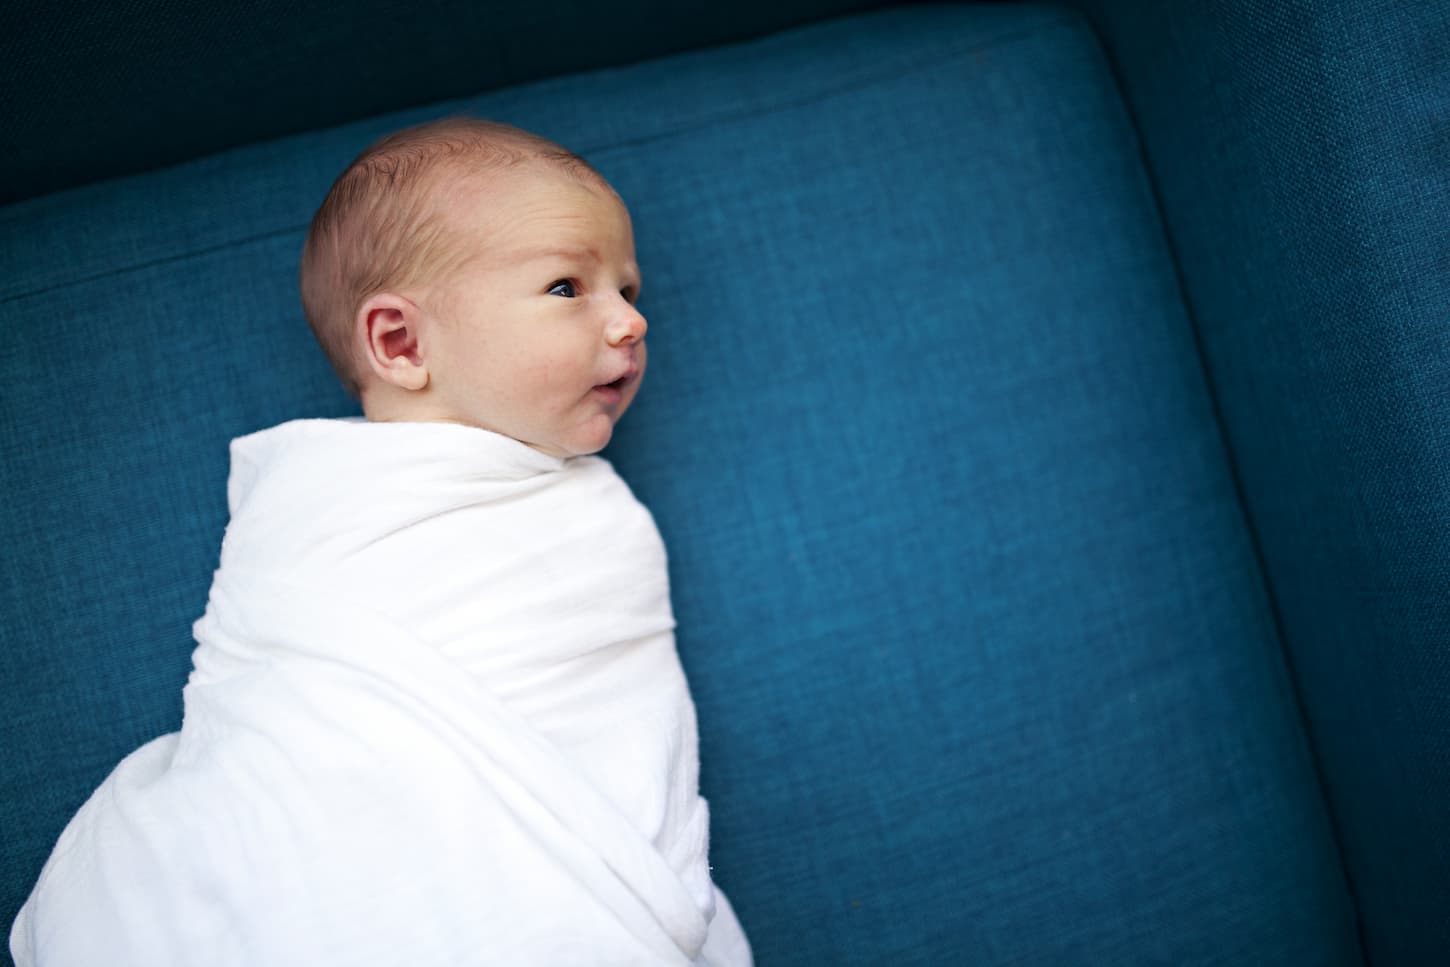 An image of a swaddled newborn baby lying on a blue sofa couch.